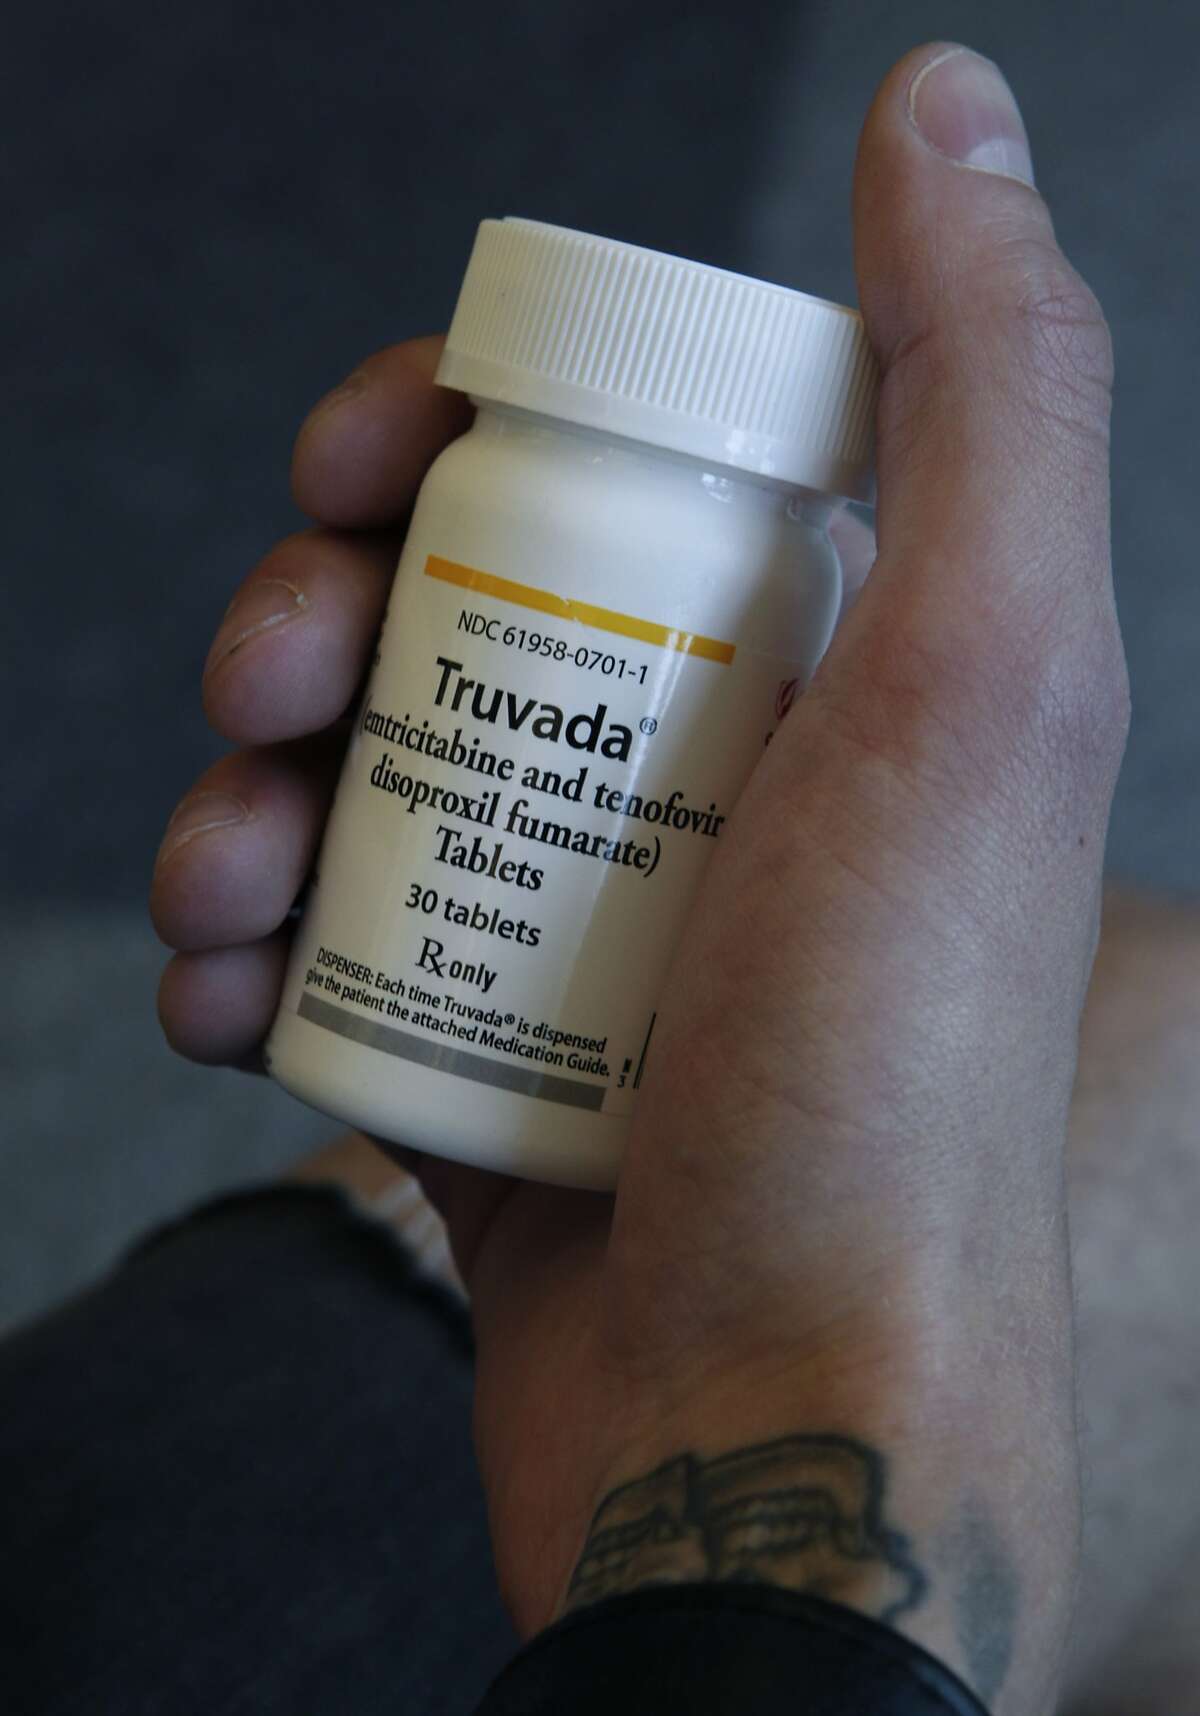 Adam Zeboski, an HIV counselor for the SF AIDS Foundation, holds a bottle of Truvada in San Francisco, Calif. on Friday, May 30, 2014. Zeboski has long supported the efficacy of the drug Truvada to prevent HIV infection and the CDC has finally endorsed its mainstream use.